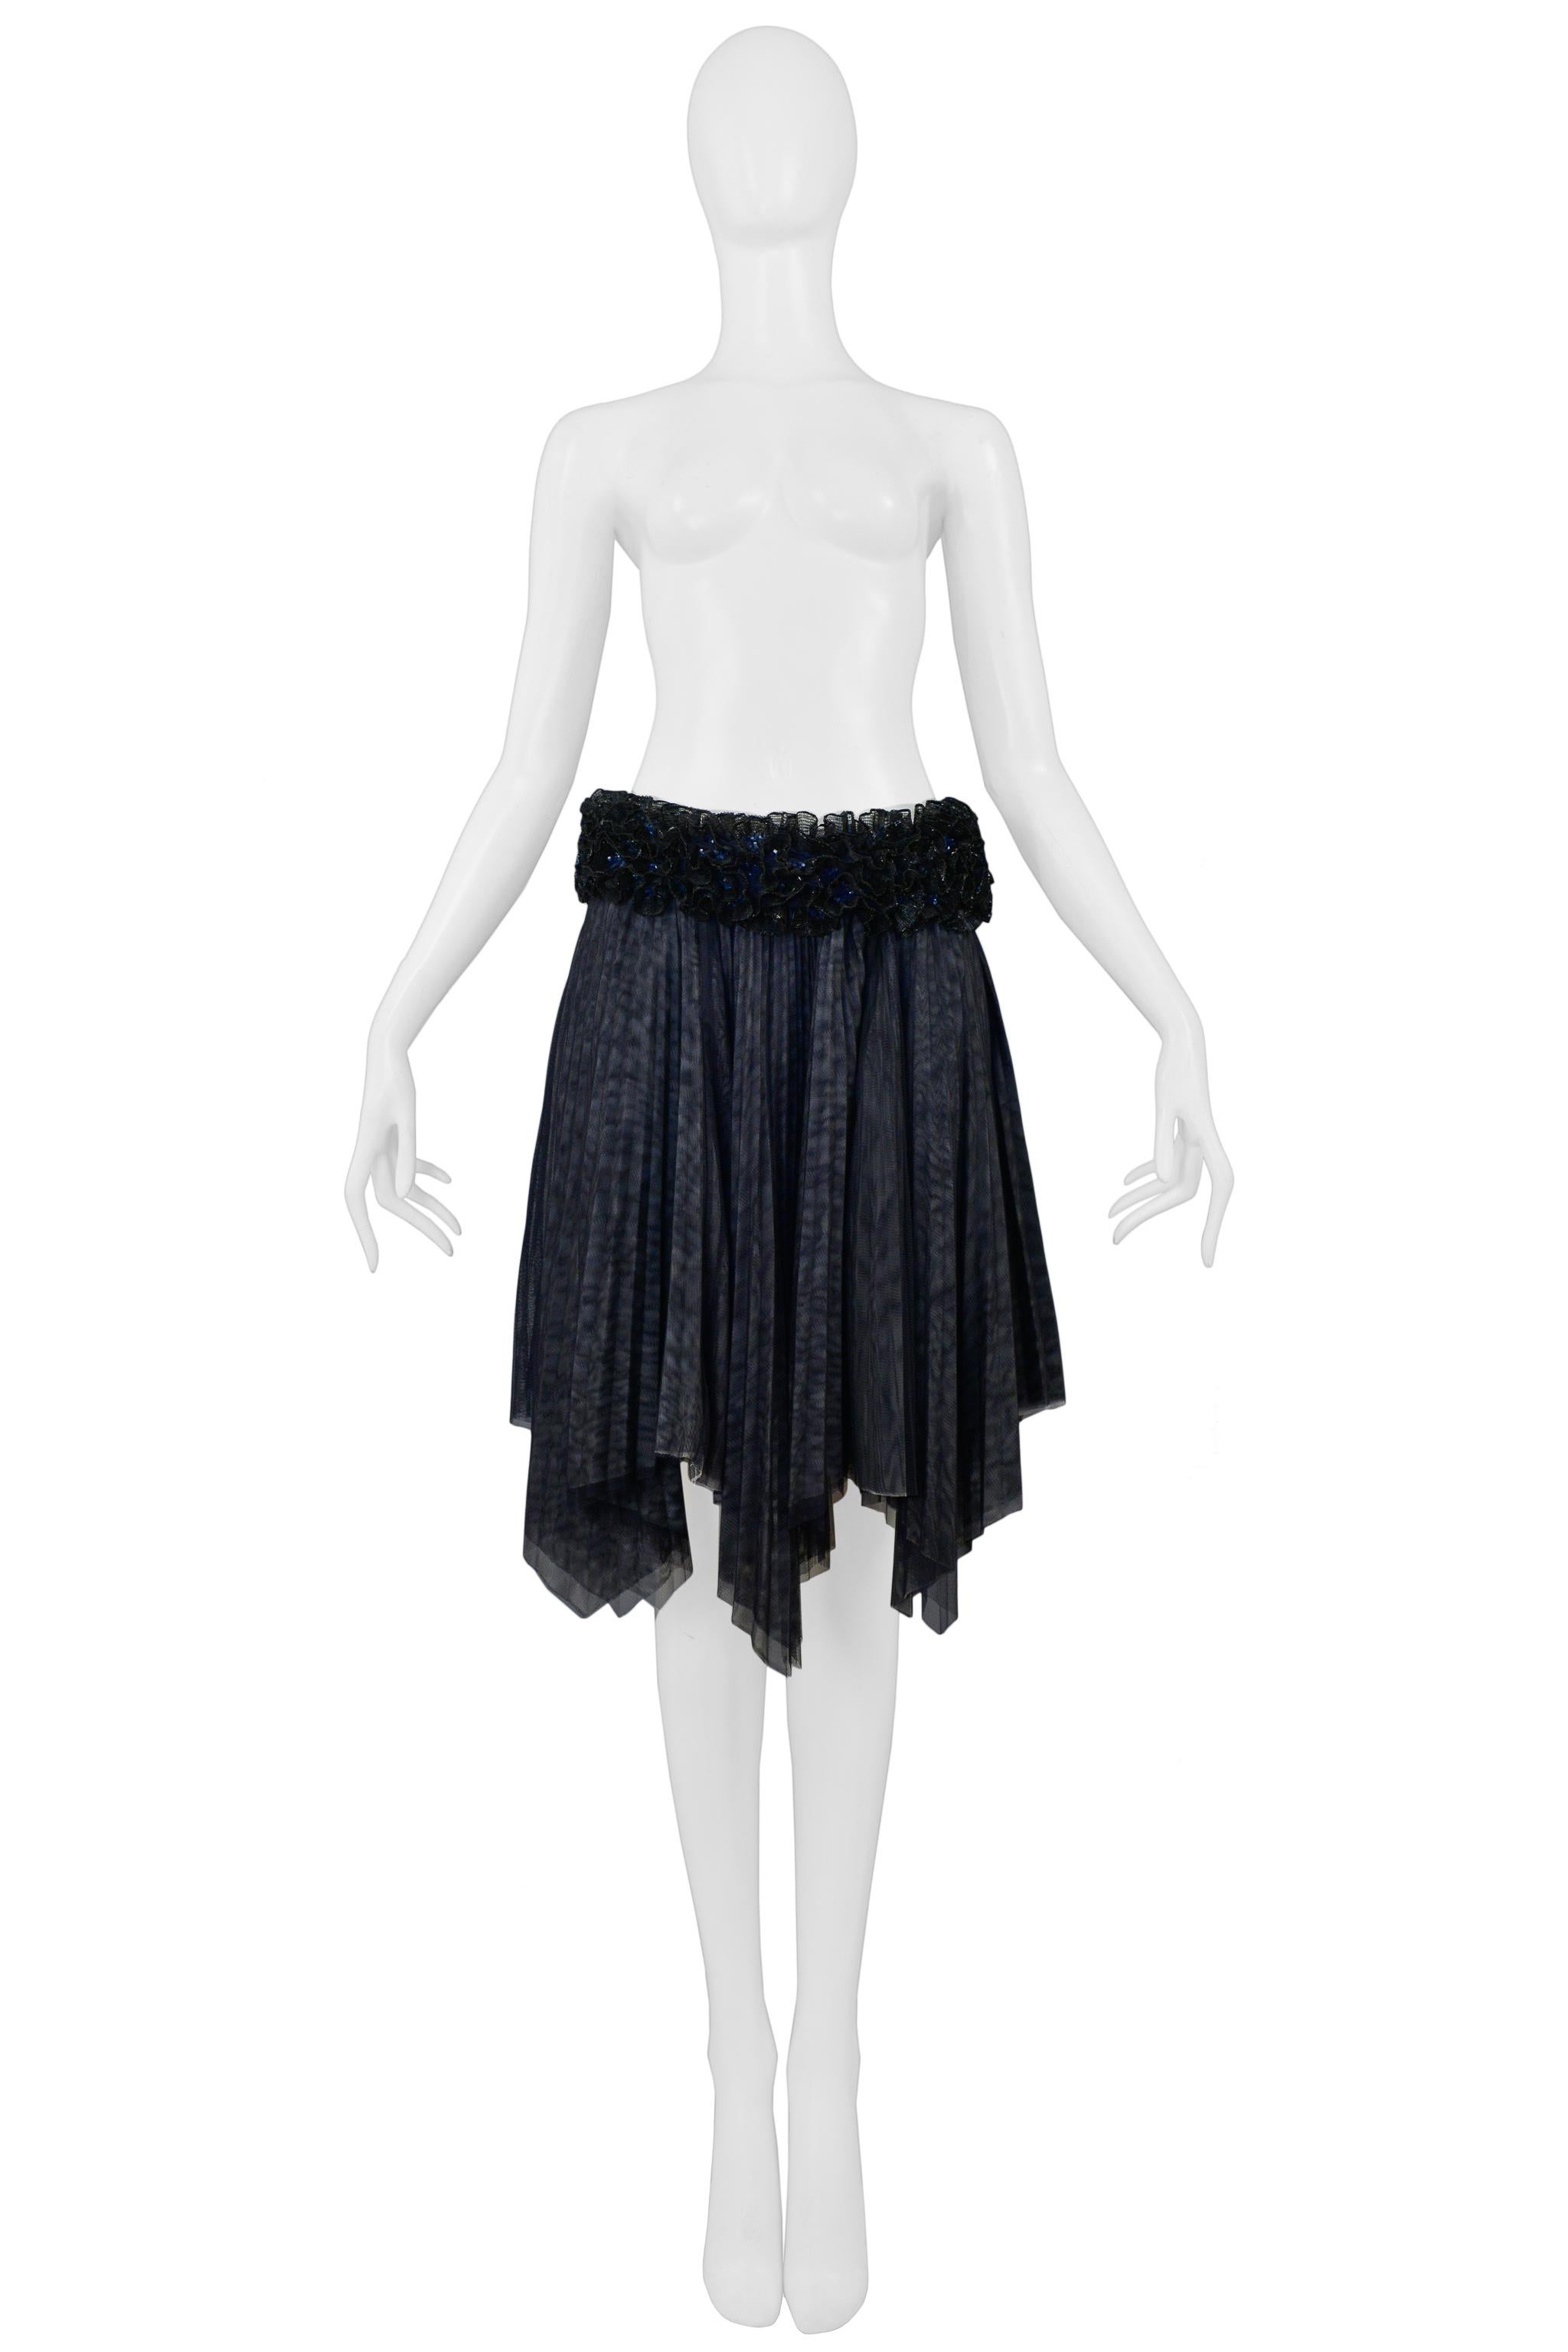 Resurrection Vintage is excited to offer a vintage Chanel by Karl Lagerfeld black pleated evening skirt featuring decorative black mesh flowers and rhinestone beaded waistband, top black layer and off white underlayer, sharp pleats, asymmetrical